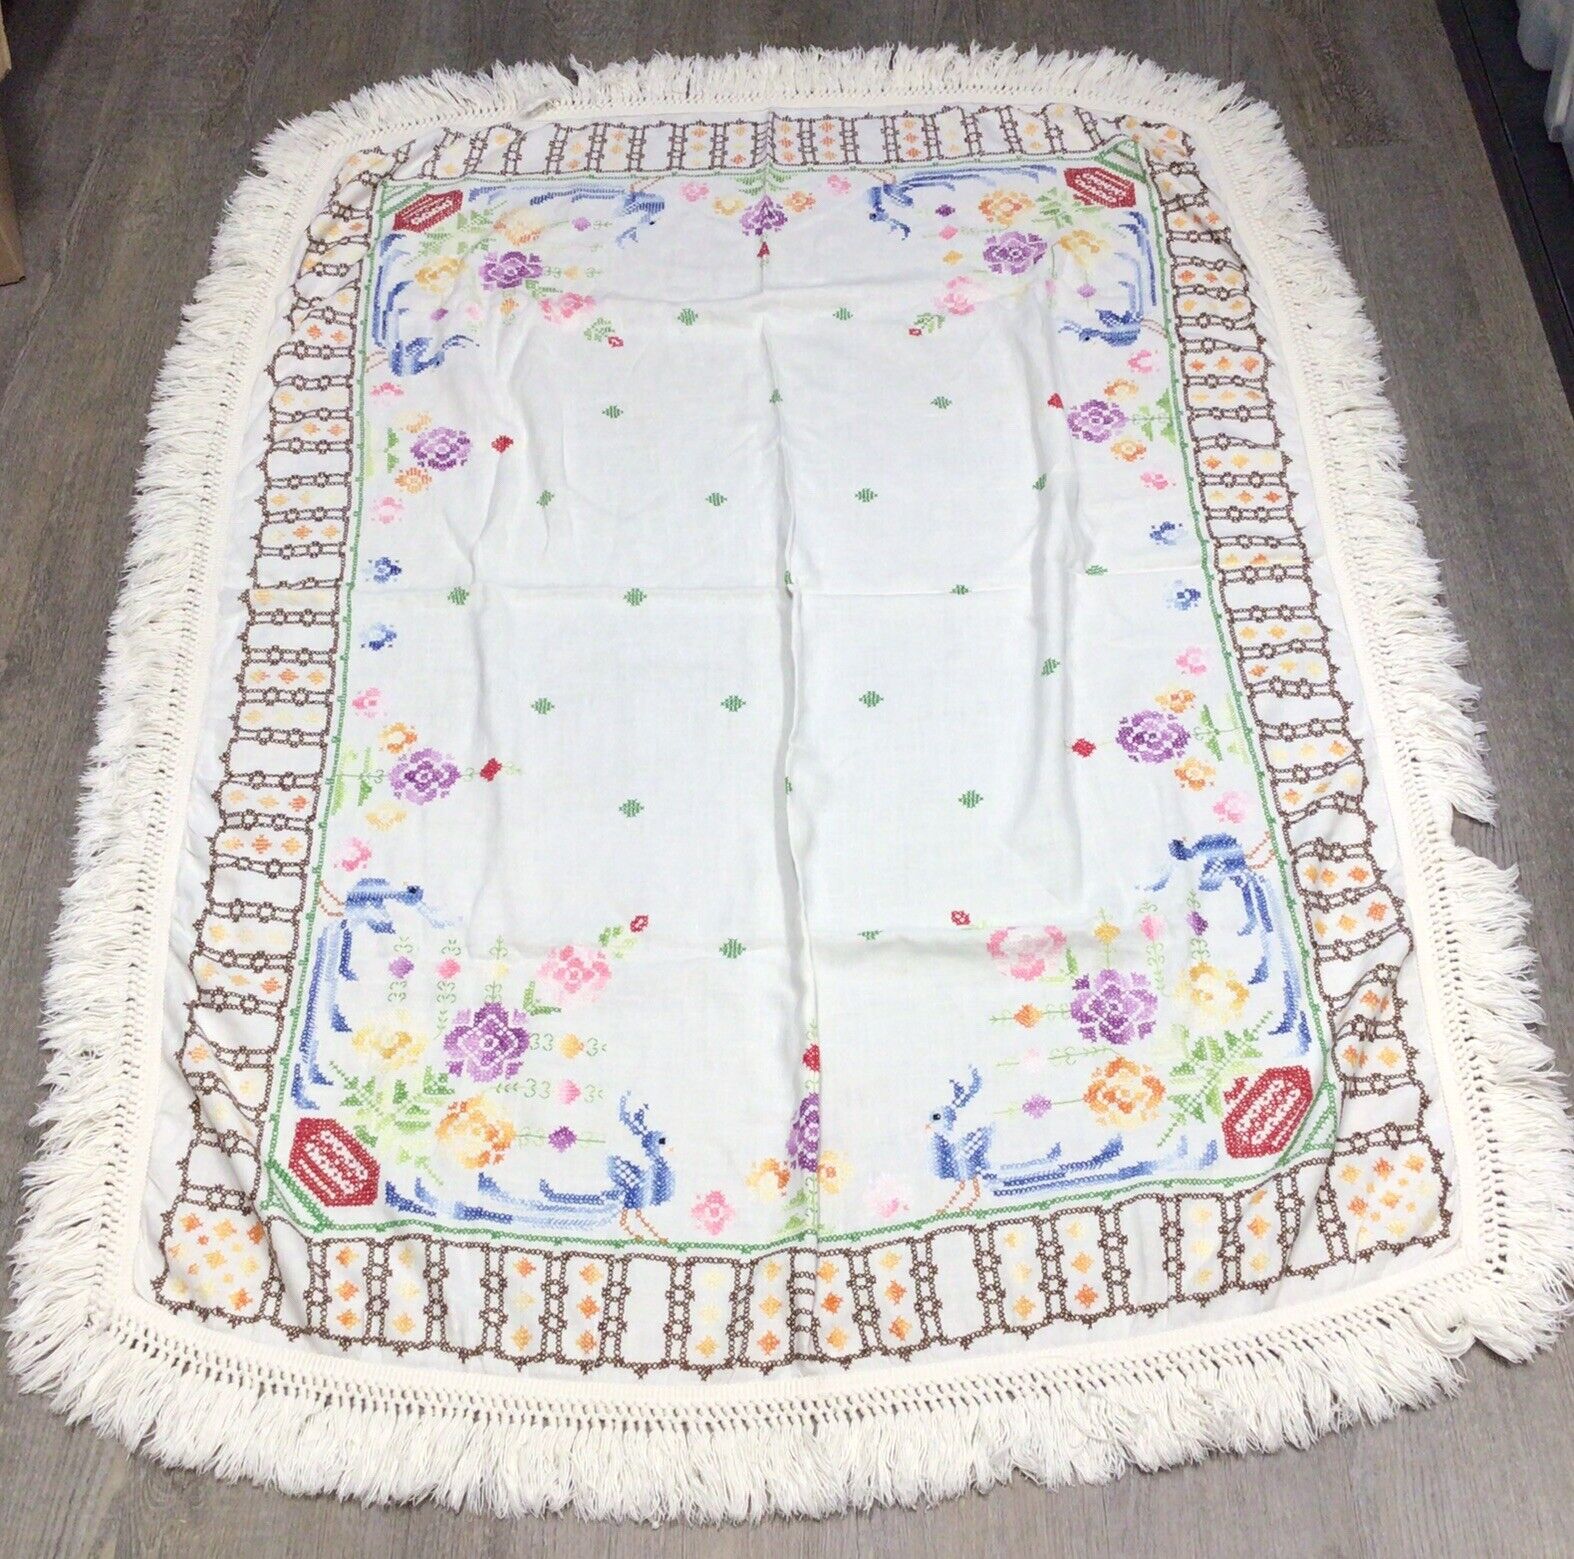 Vintage Embroidered Tablecloth Fringe 68” X 48” Peacock Flowers